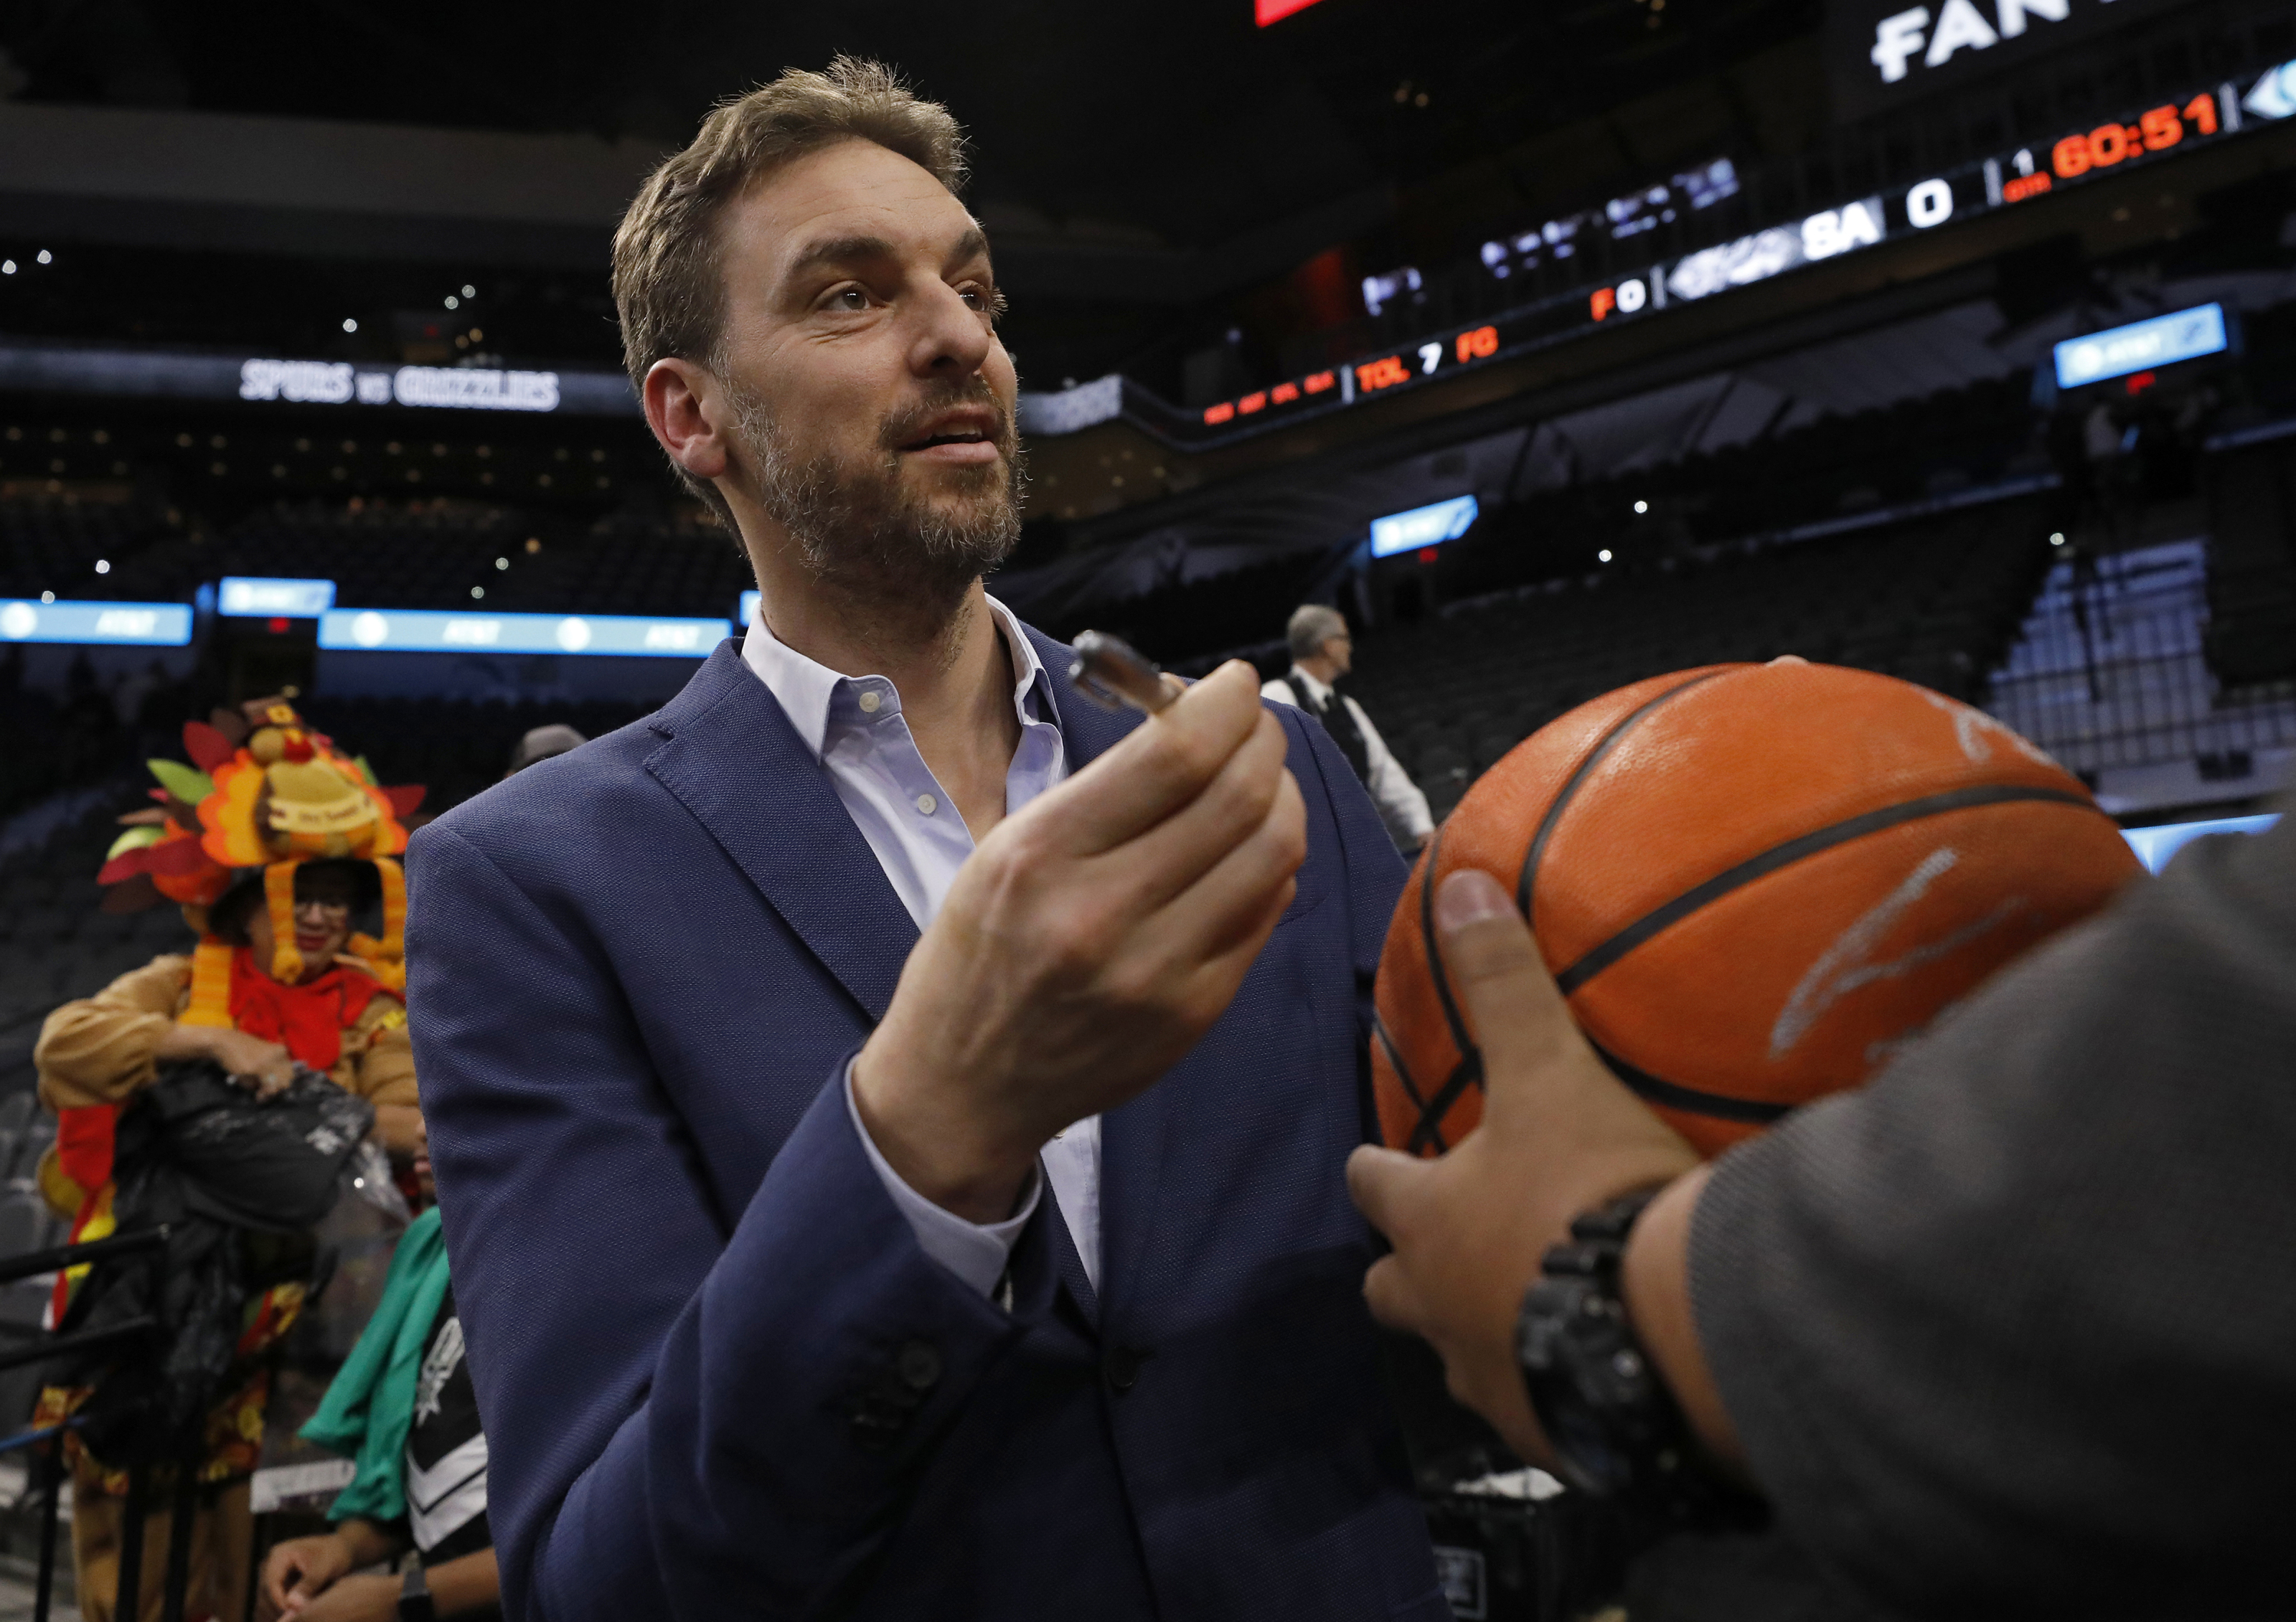 Pau Gasol deserves to have his jersey retired by the Lakers